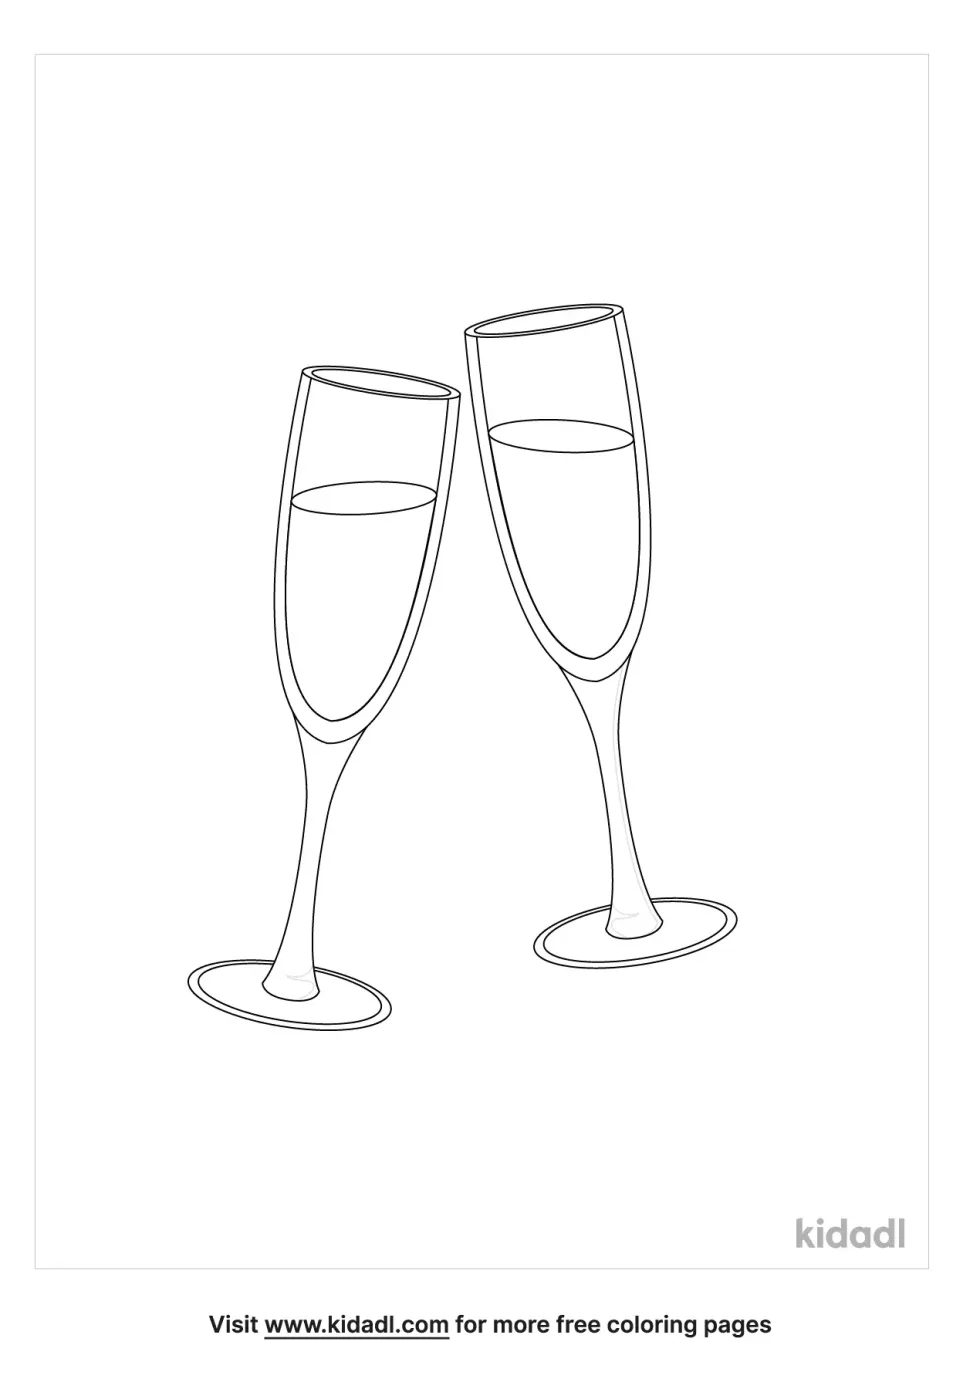 Champagne Glasses Coloring Page